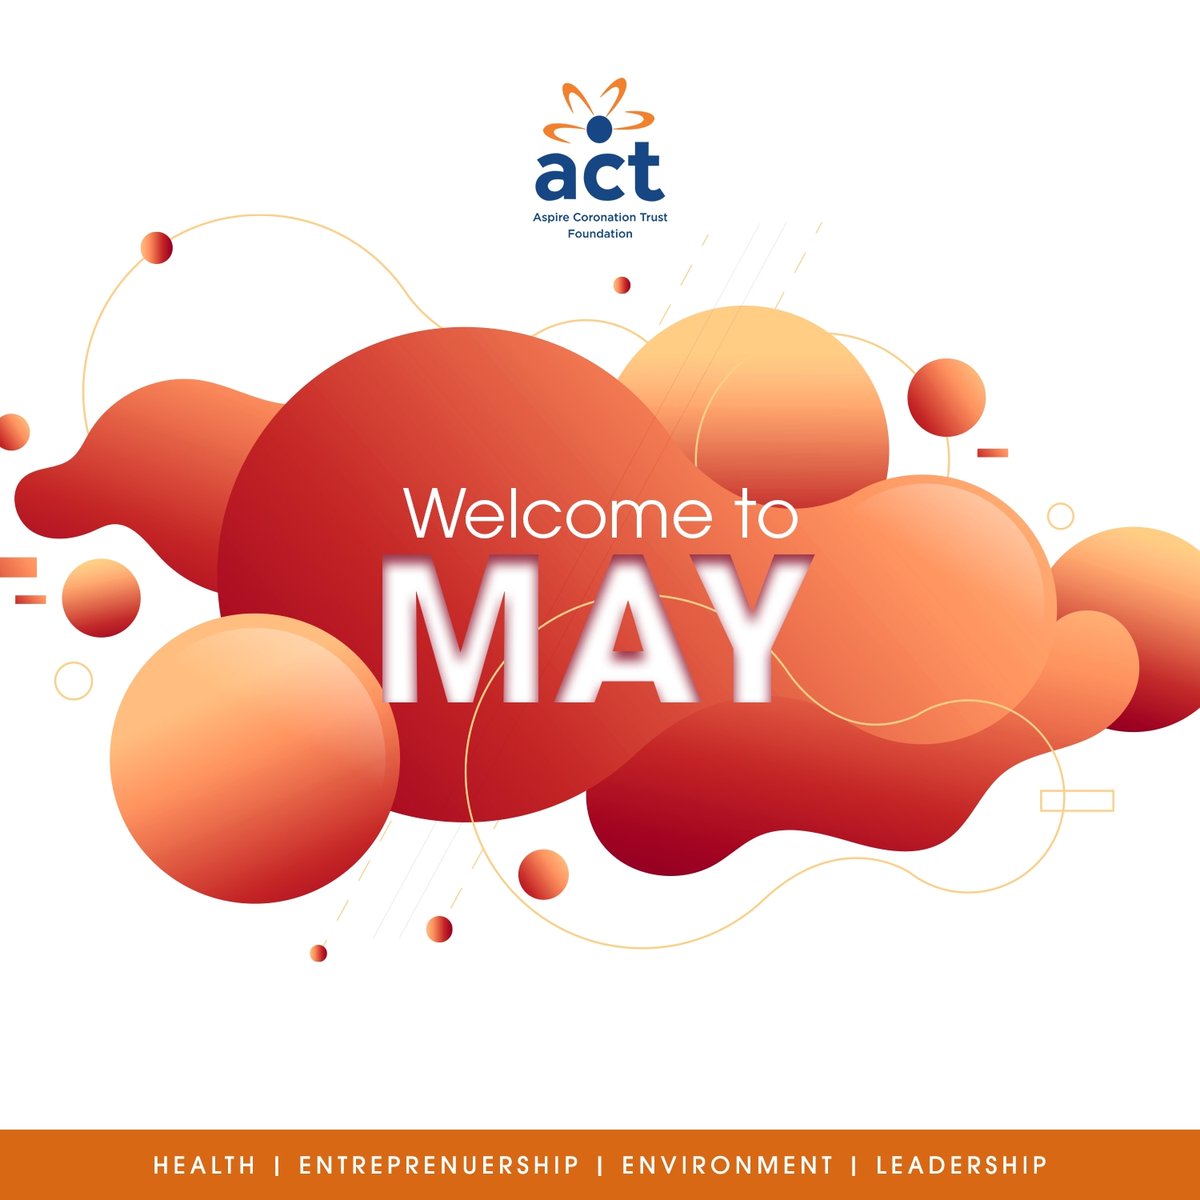 Happy New Month! 

May the month of May usher in great possibilities and new vistas. 

#actfoundation #grantmaking #newmonth #impact #possibilities